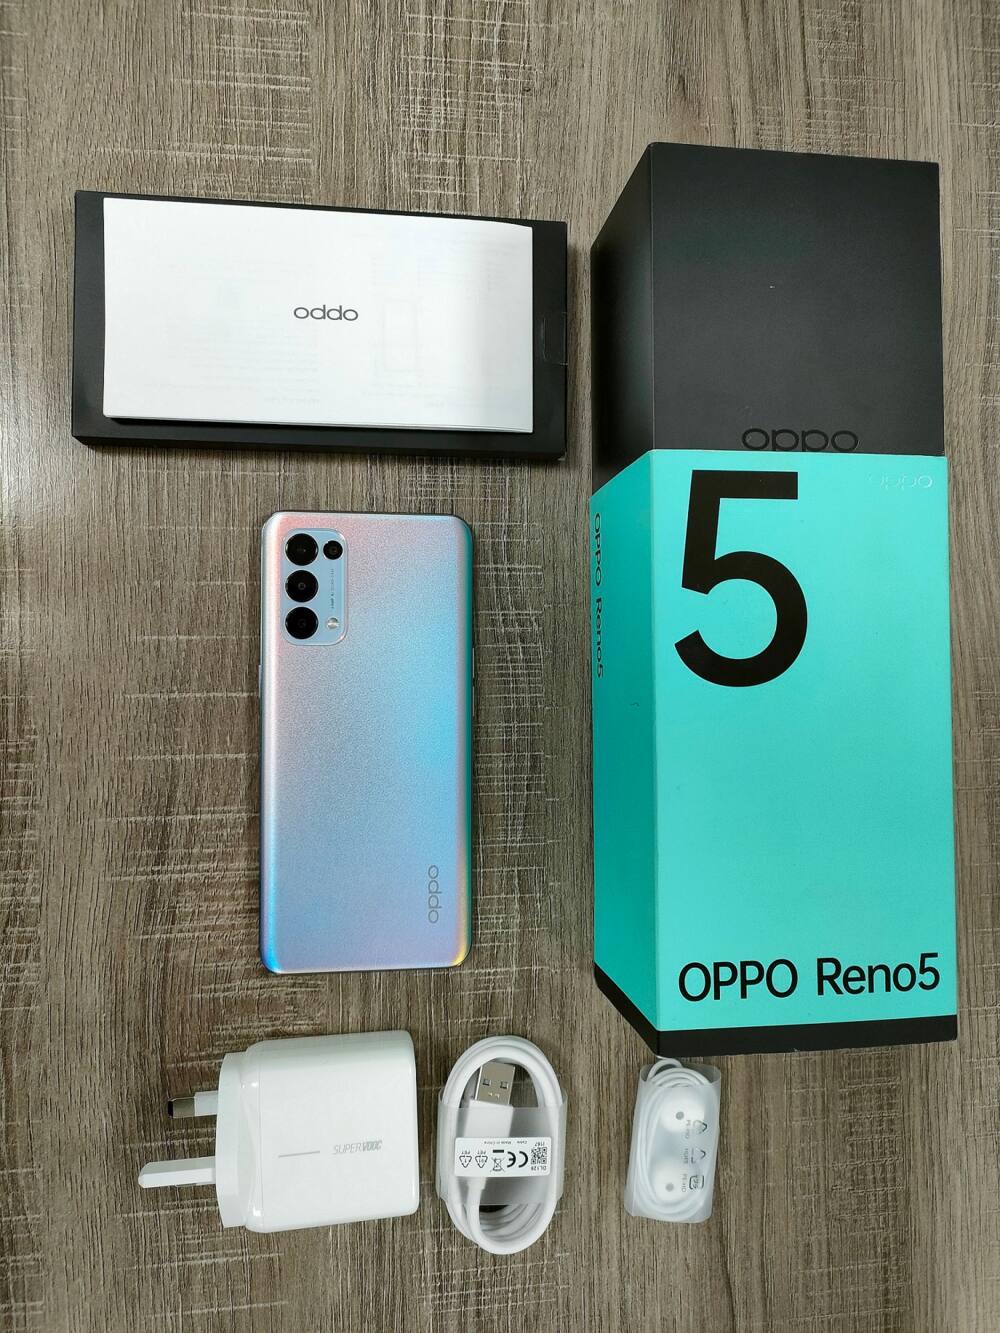 OPPO Reno5 and Reno5 F is being launched in Kenya on 22